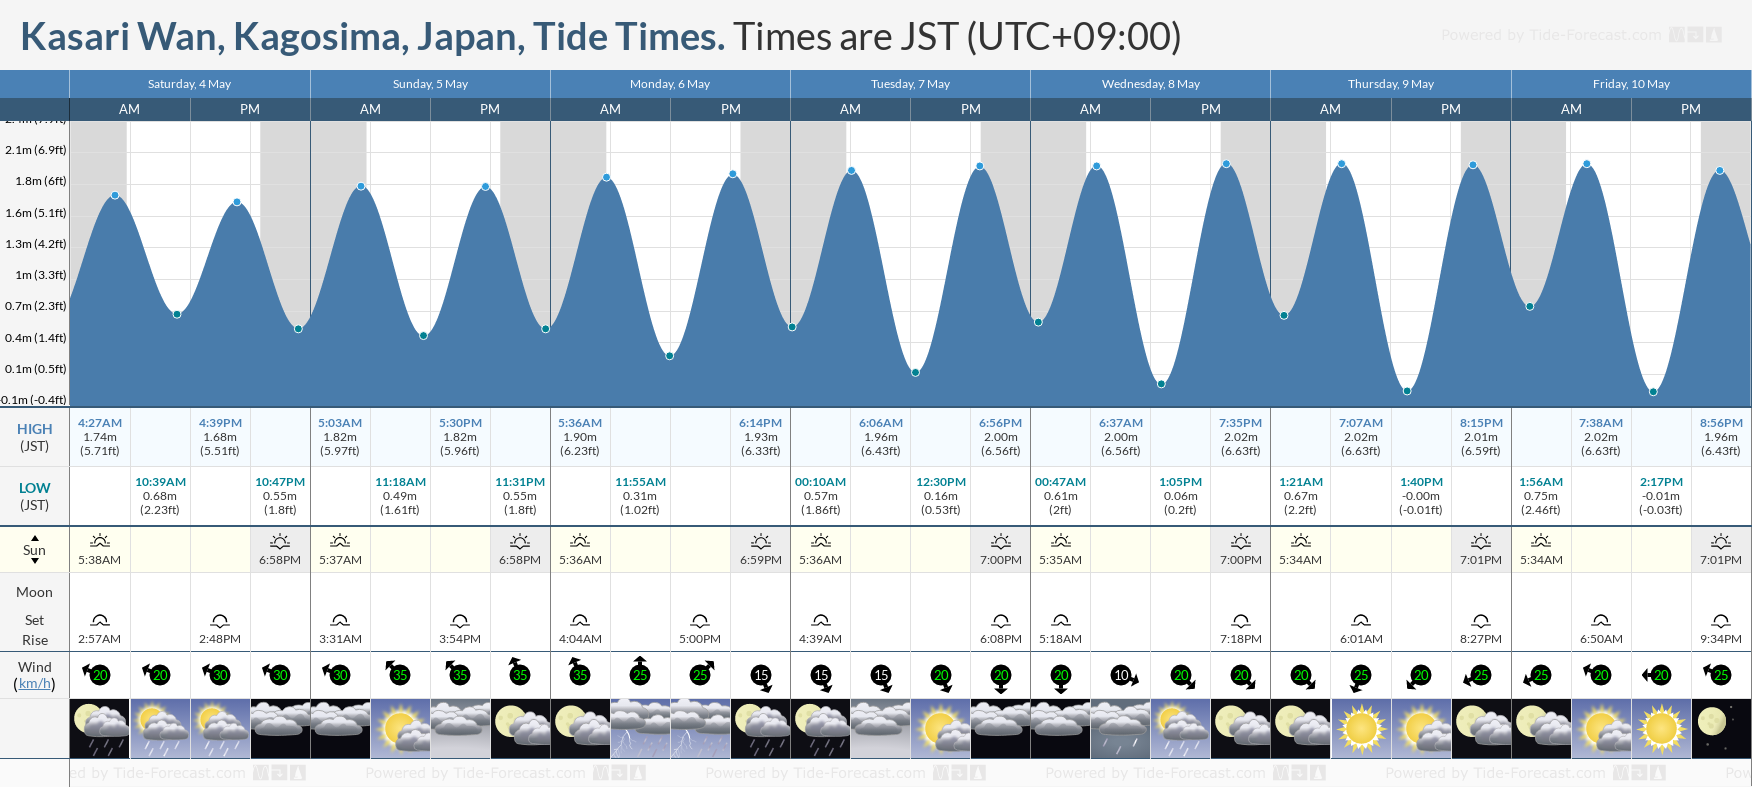 Kasari Wan, Kagosima, Japan Tide Chart including high and low tide tide times for the next 7 days